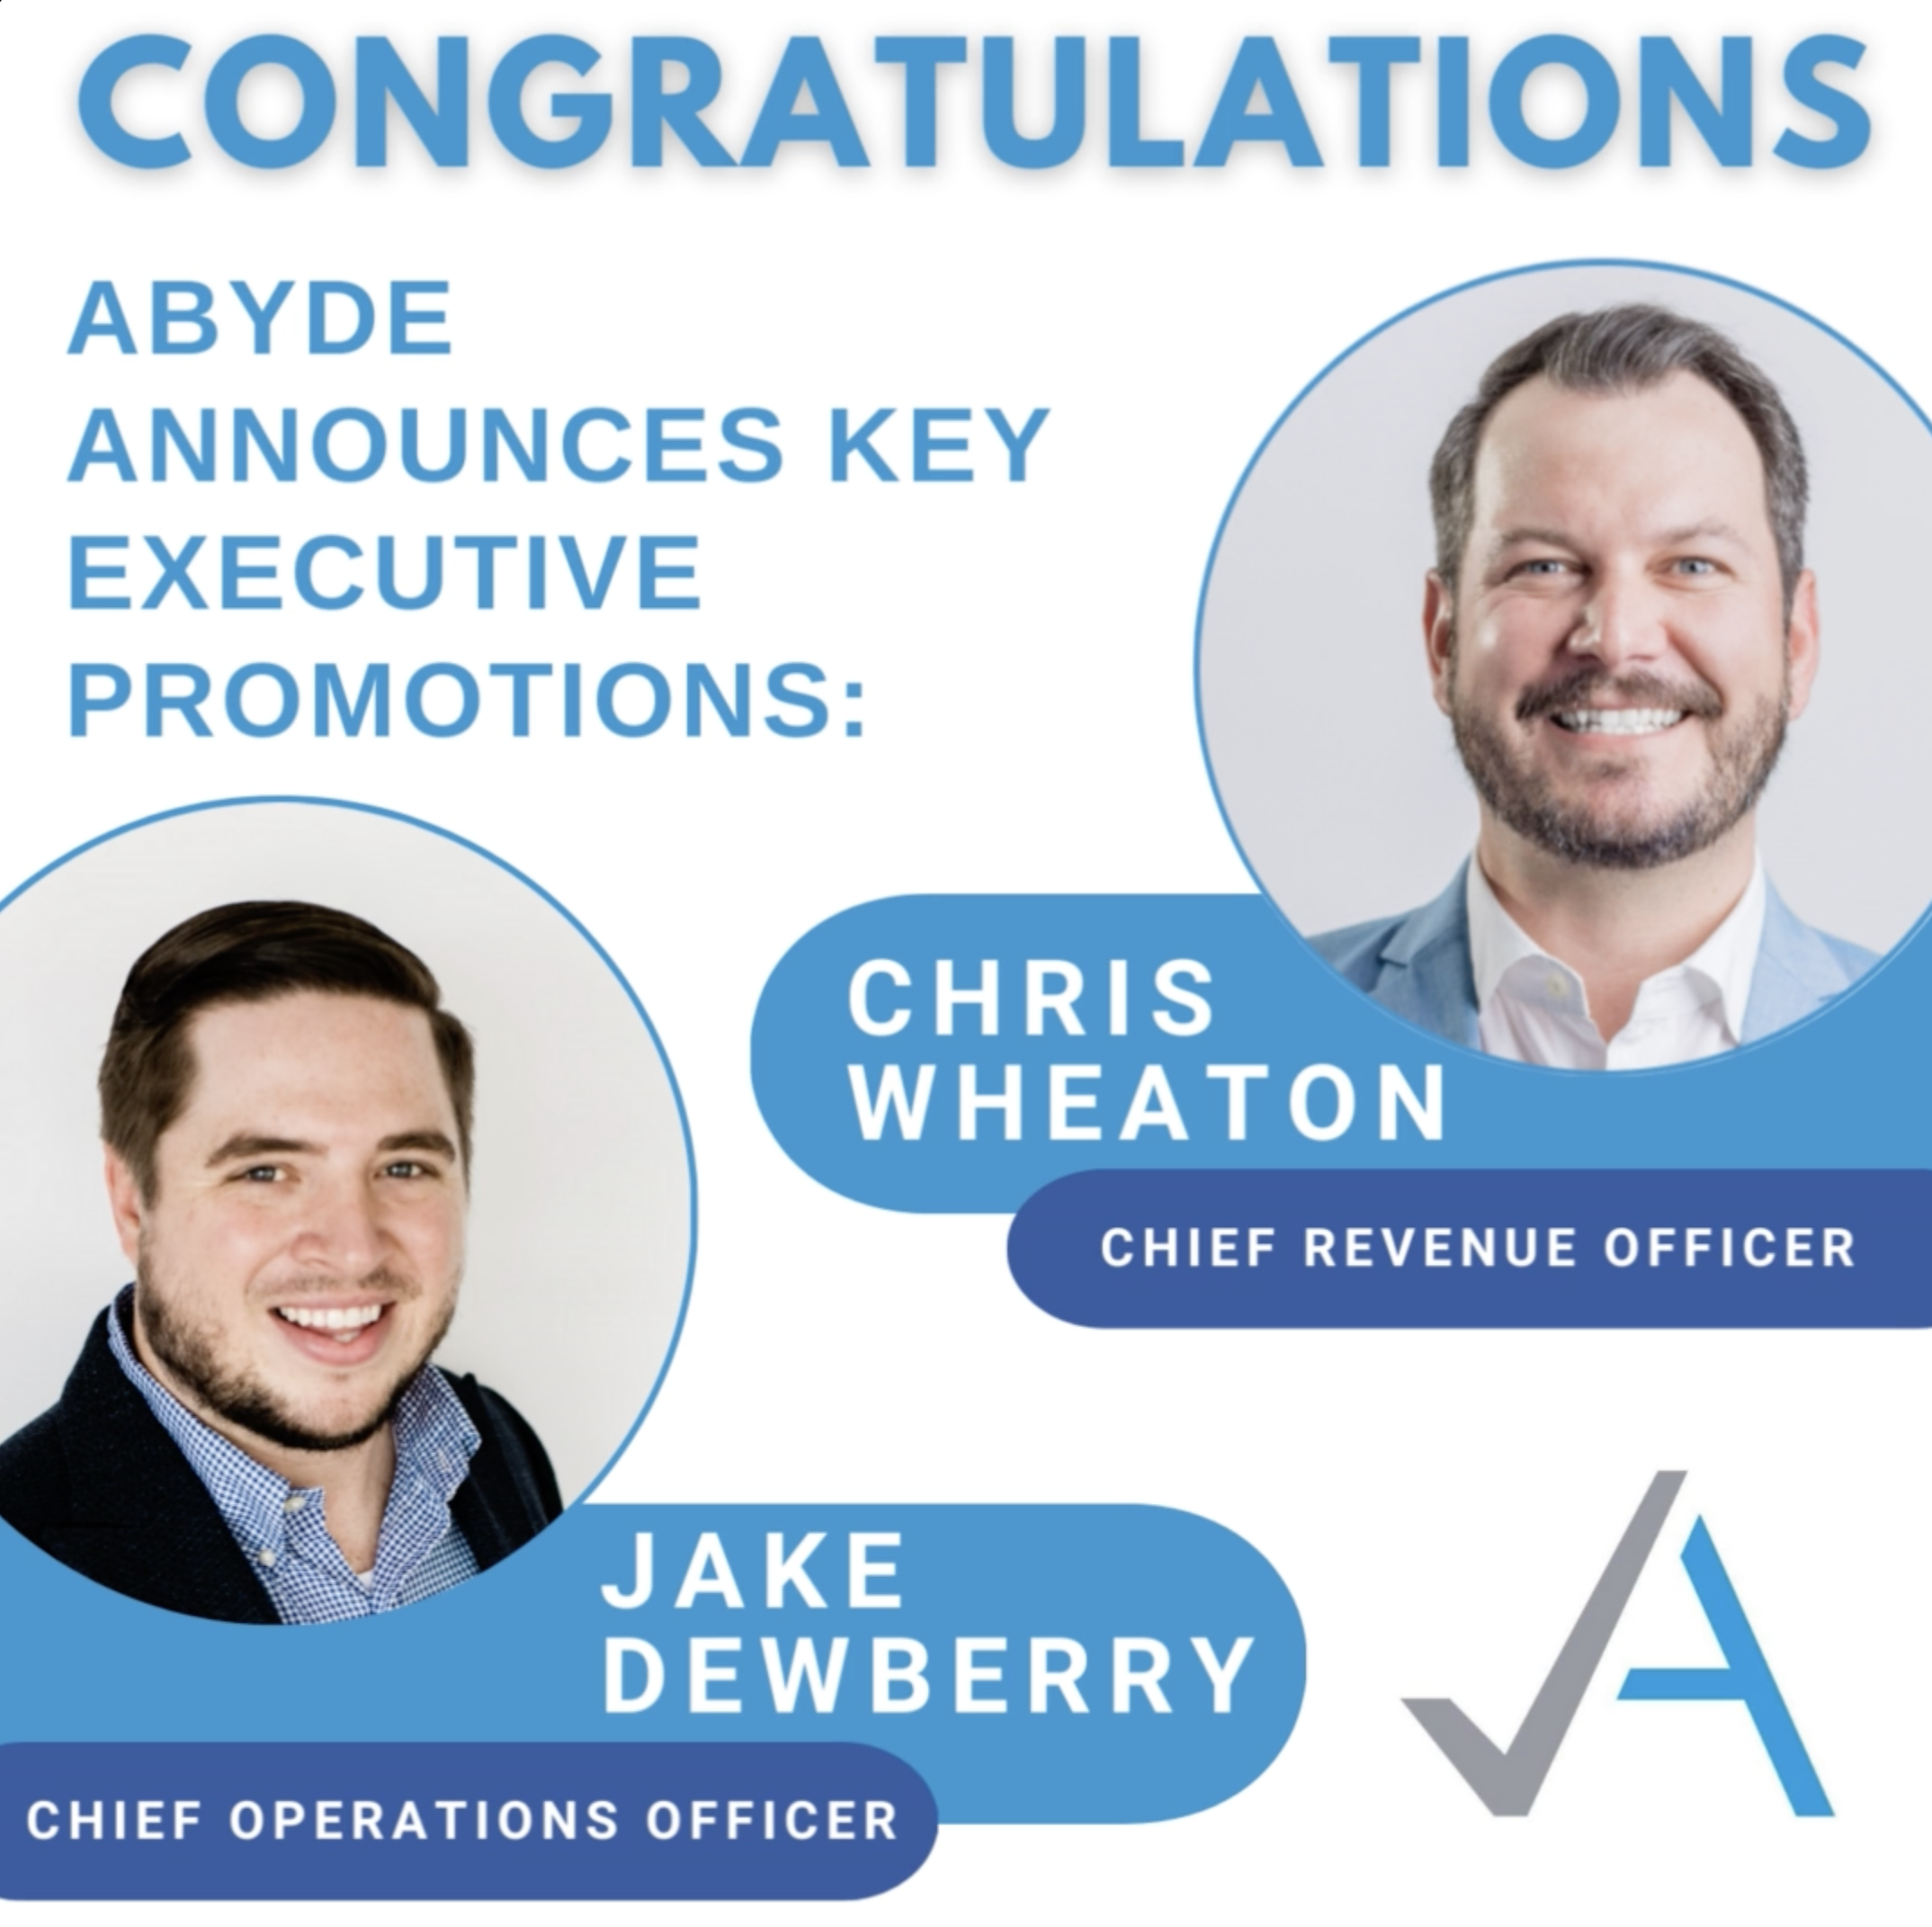 Abyde Announces Key Executive Promotions: Jake Dewberry Named COO and Chris Wheaton Appointed as CRO